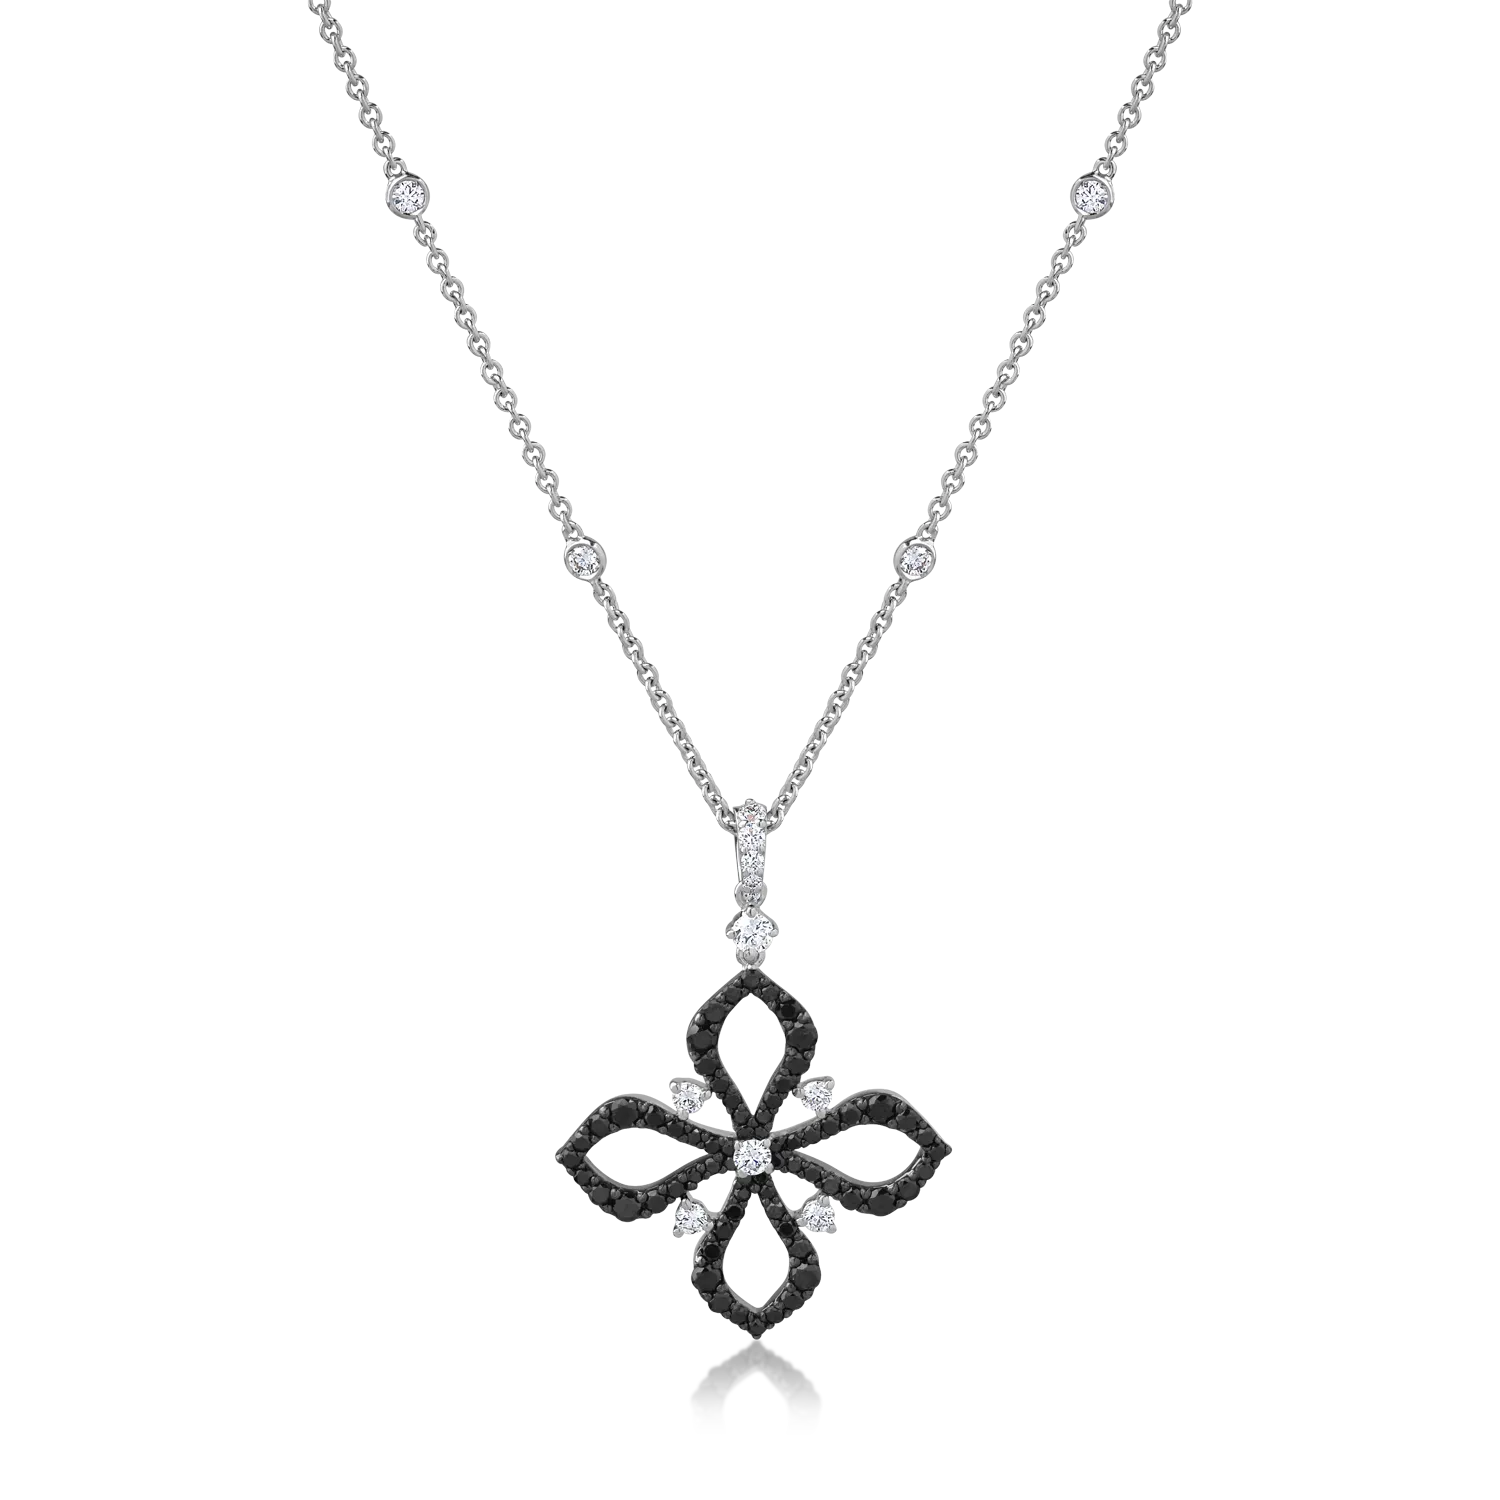 18K white gold pendant necklace with 0.81ct clear diamonds and 0.94ct black diamonds